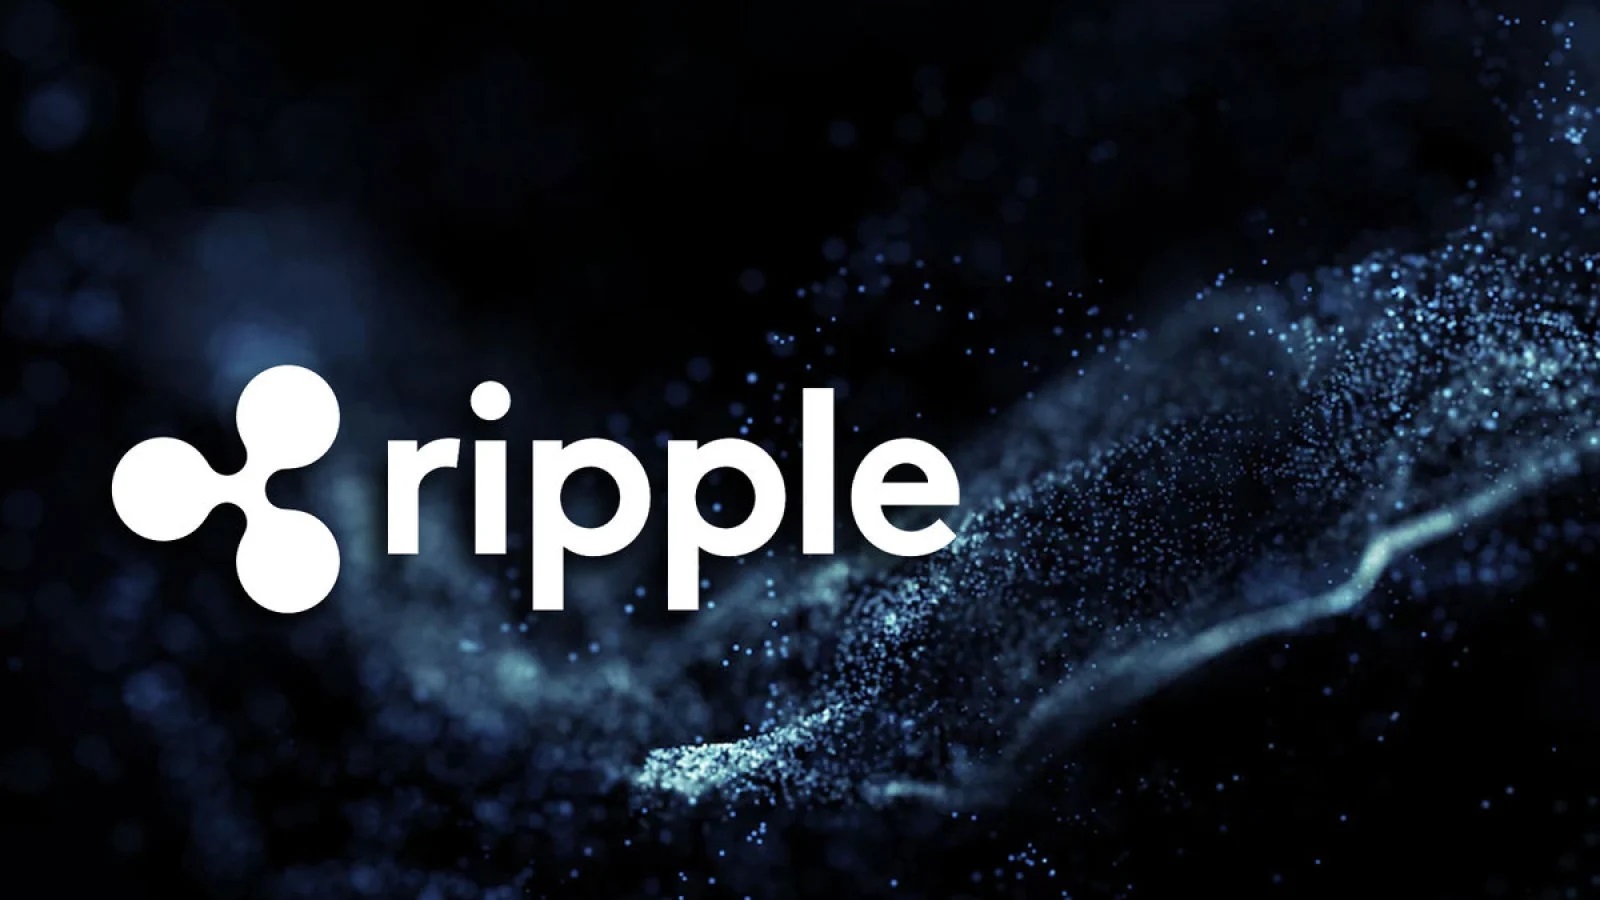 Wall Street Expert Identifies May as ‘Best Date’ for Ripple's IPO - Coin Edition